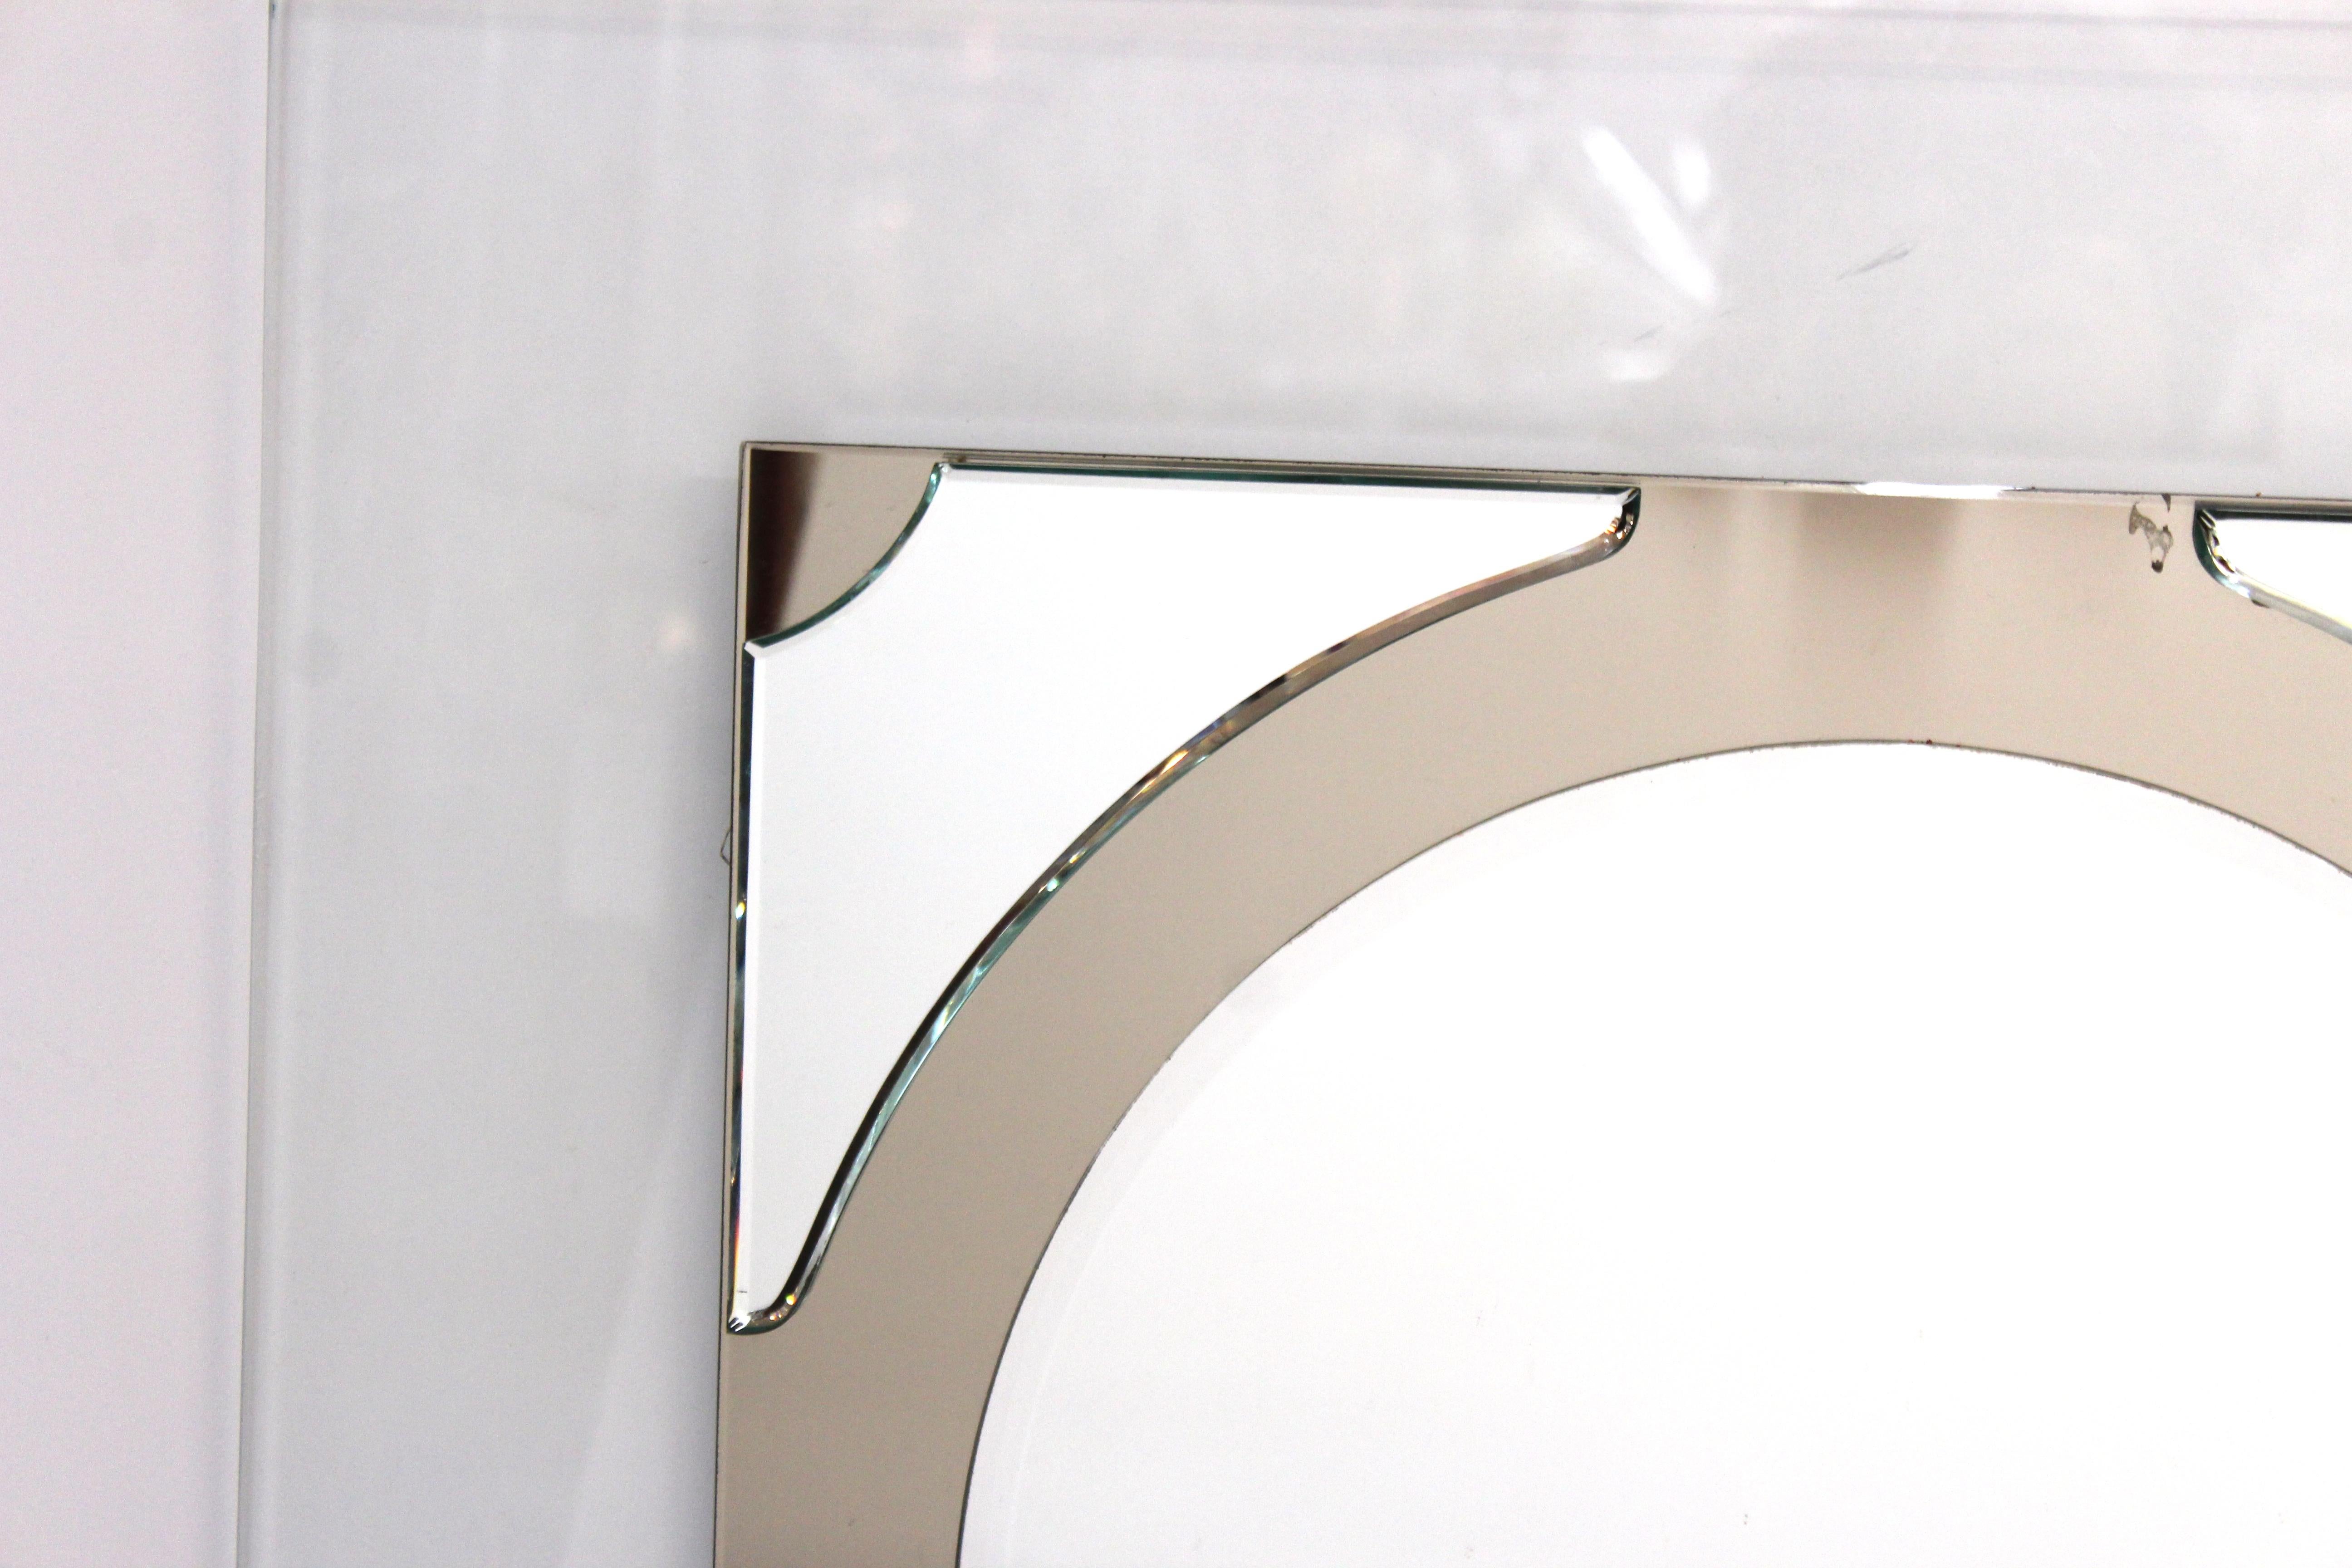 Late 20th Century Postmodern Round Mirror on Rectangular Glass Frame For Sale